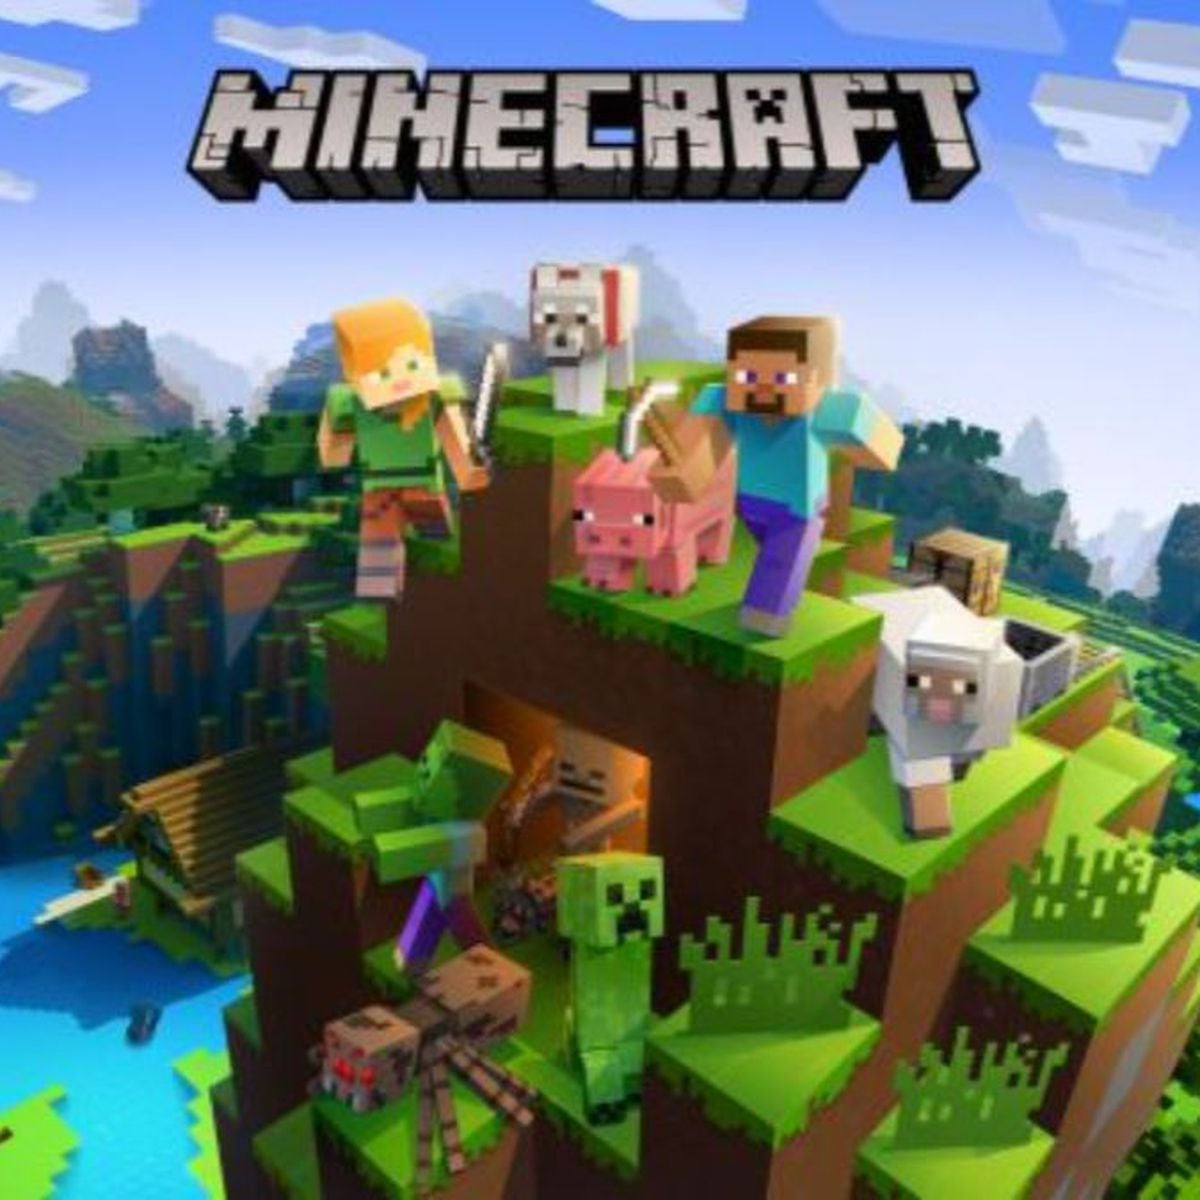 Minecraft: the best servers to play in 2023 - Meristation